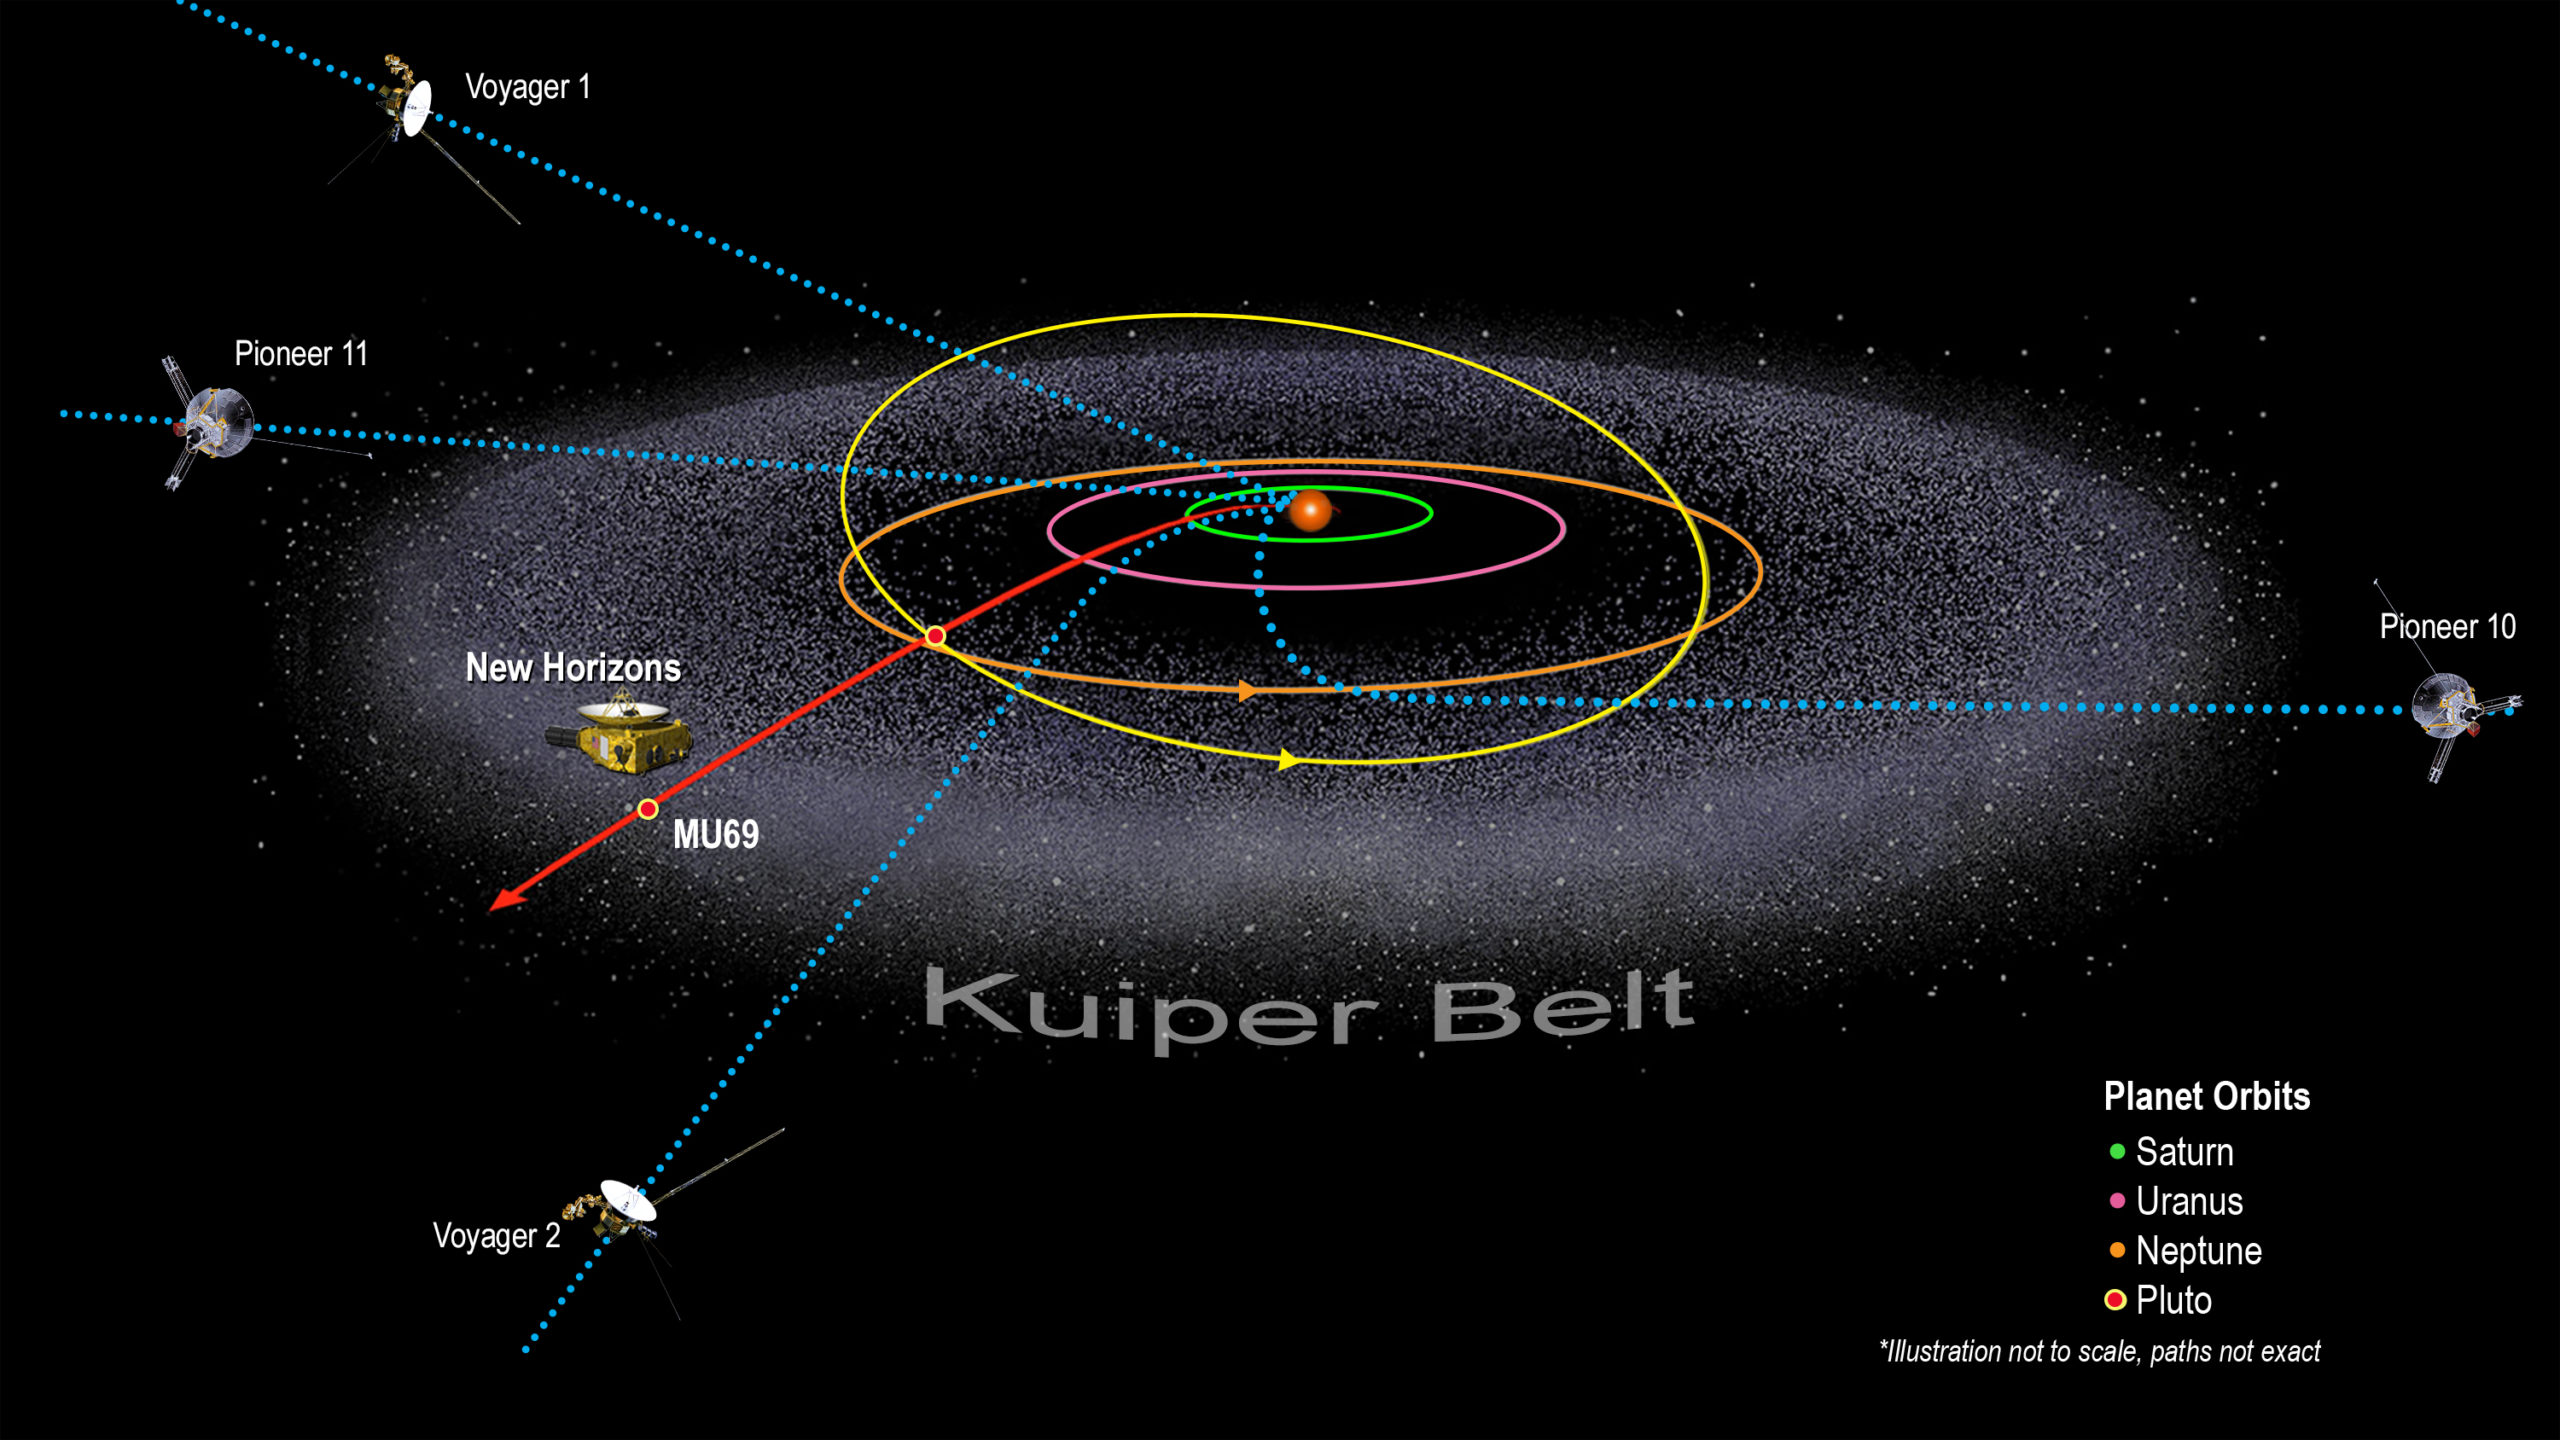 What Was Discovered beyond Pluto? Makemake – the Largest Object in the Kuiper Belt